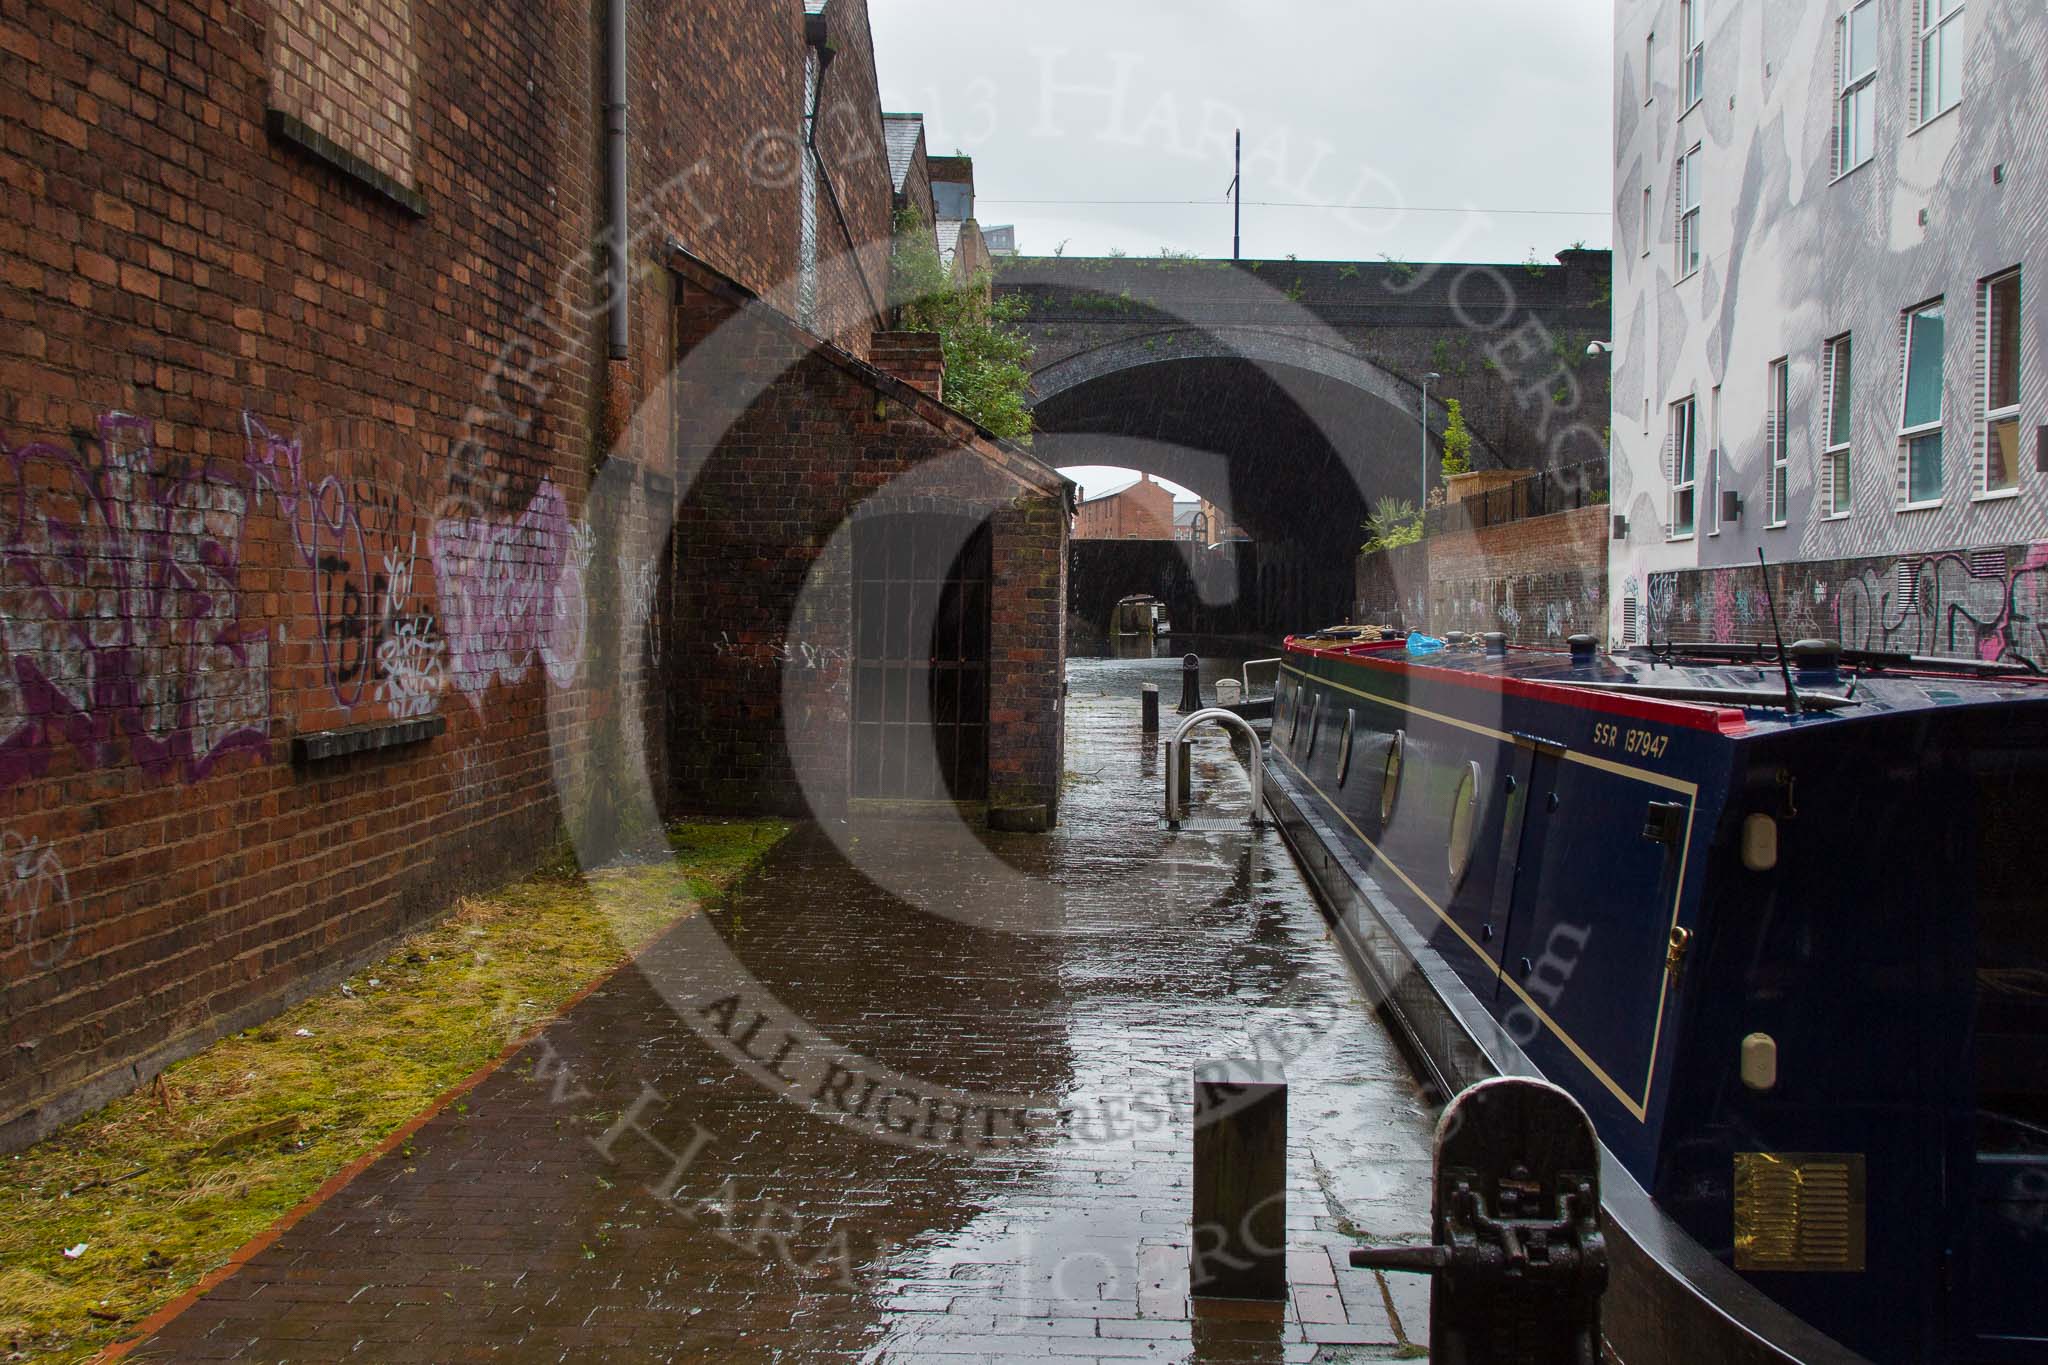 BCN Marathon Challenge 2014: A lengthman's hut (?) at the Farmers Bridge Bottom Lock on the Birmingham & Fazeley Canal. On the left used to be a varnish and ink factory..
Birmingham Canal Navigation,


United Kingdom,
on 23 May 2014 at 15:09, image #38